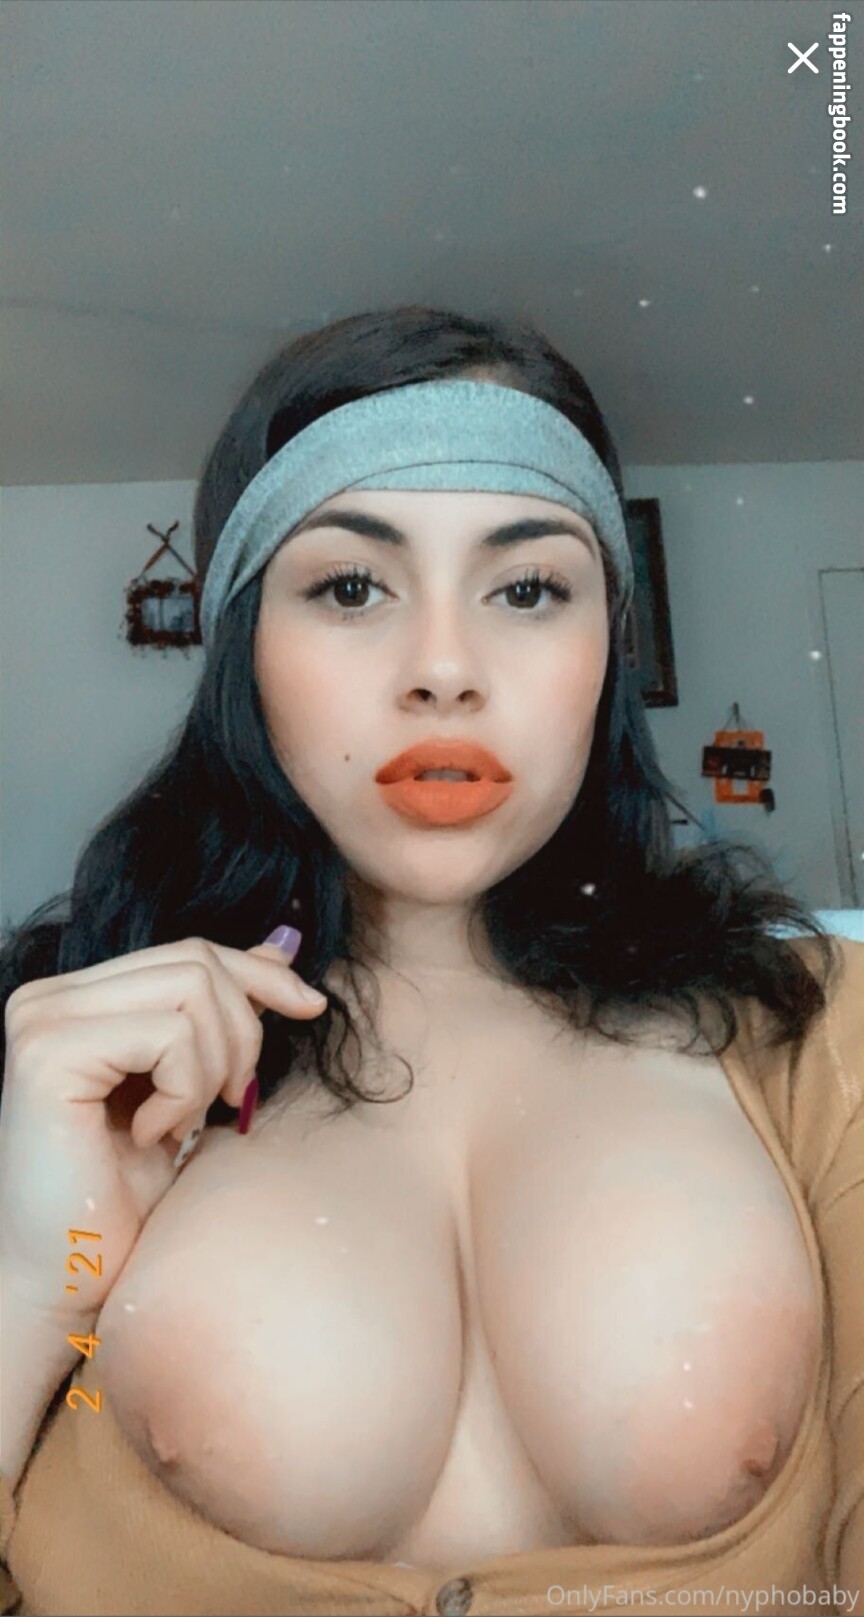 Nyphobaby leaked onlyfans